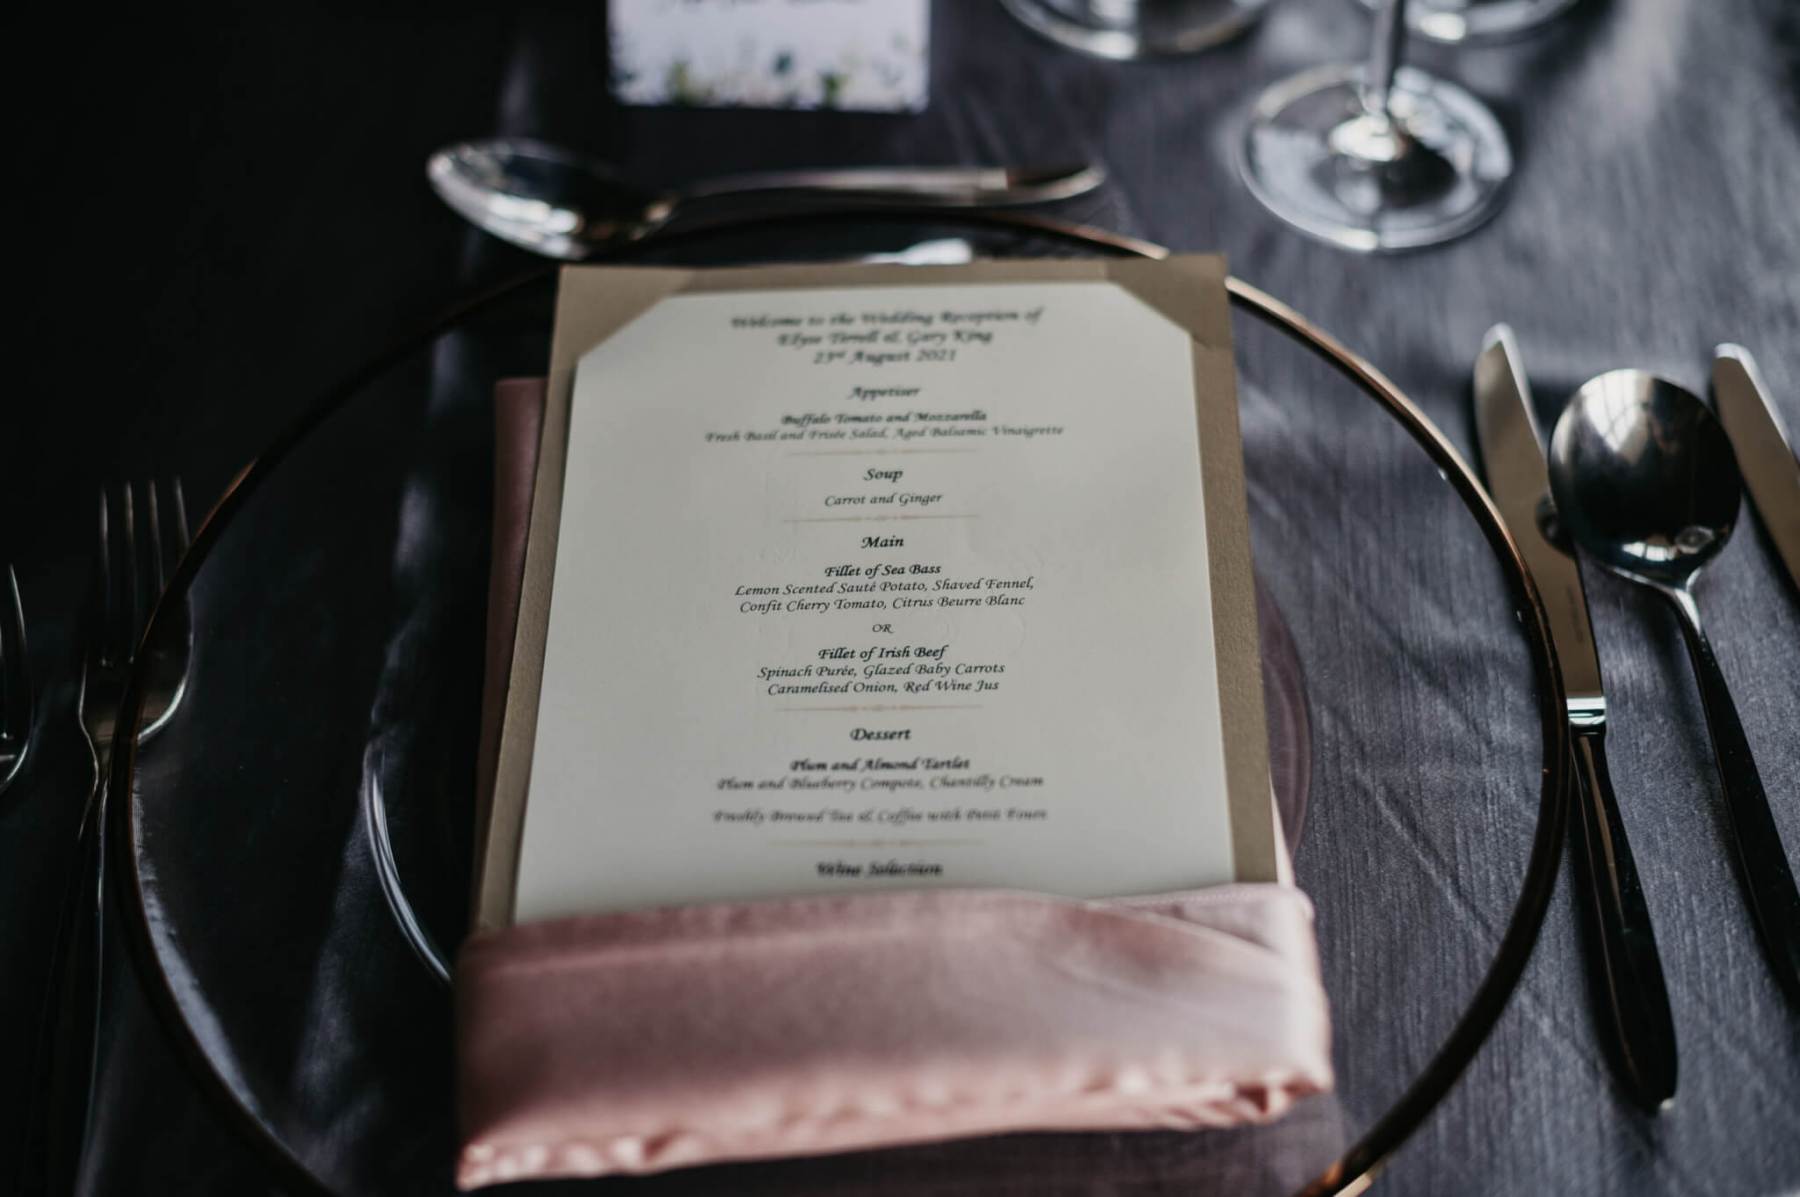 an example of default venue menus displayed at the table setting